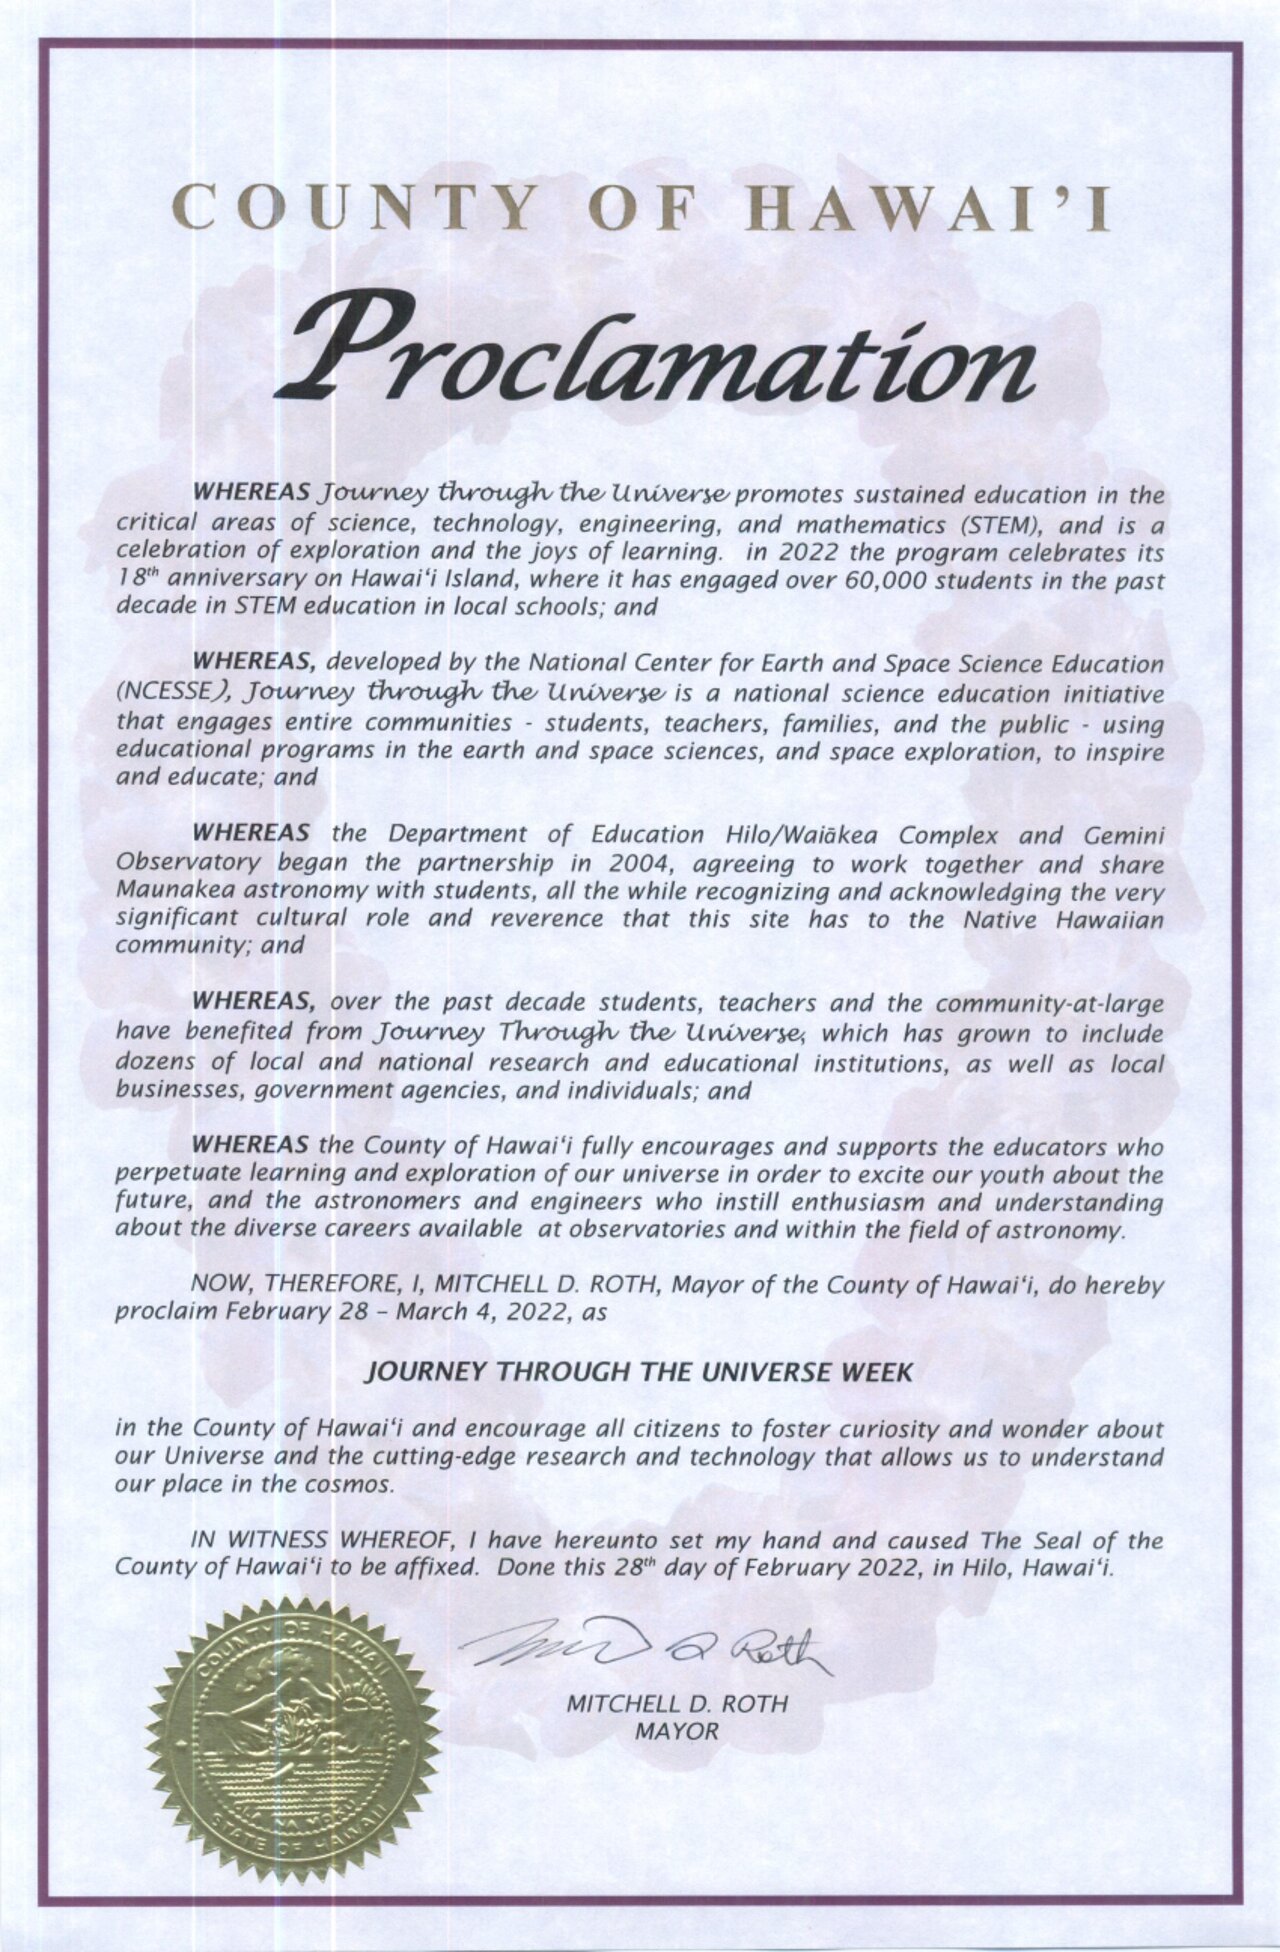 Document of Proclamation